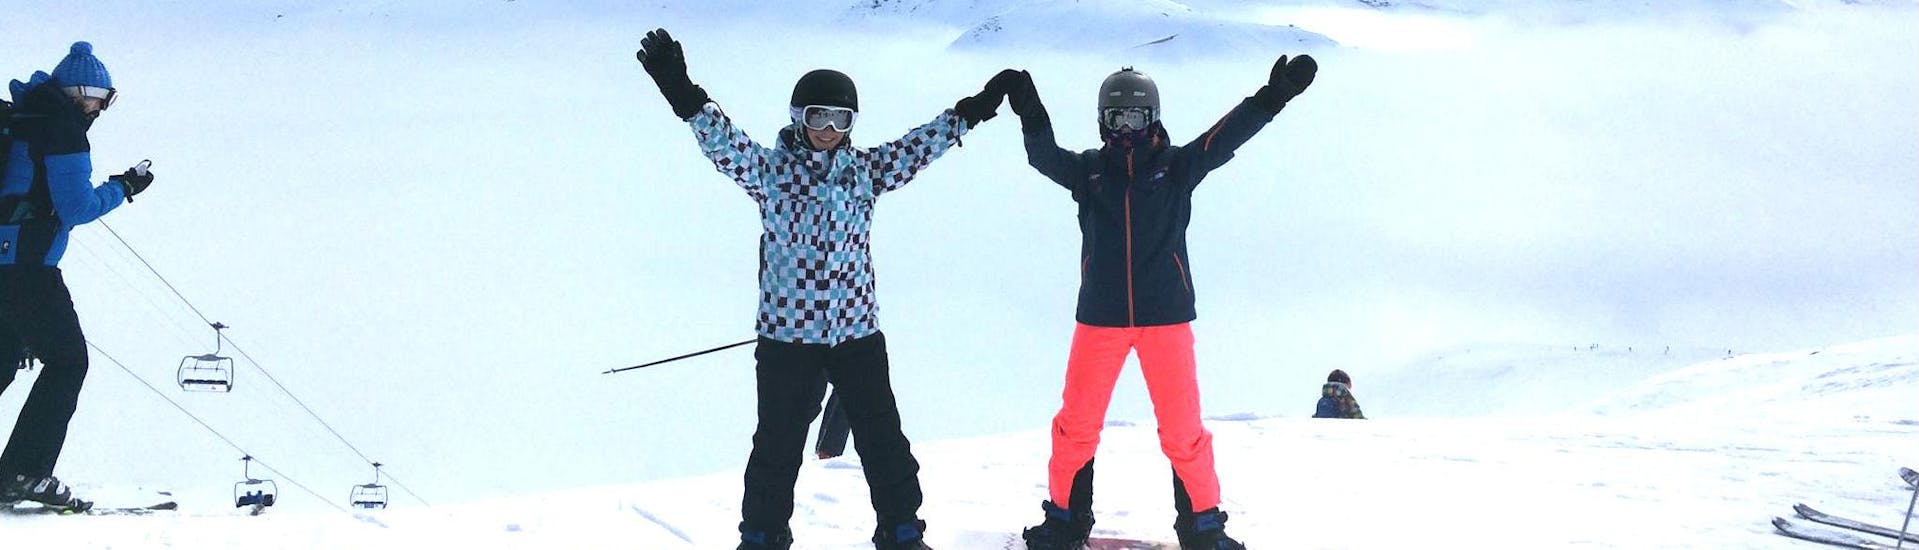 Snowboarding Lessons (from 8 y.) for Advanced Boarders with Swiss Ski School Wengen - Hero image